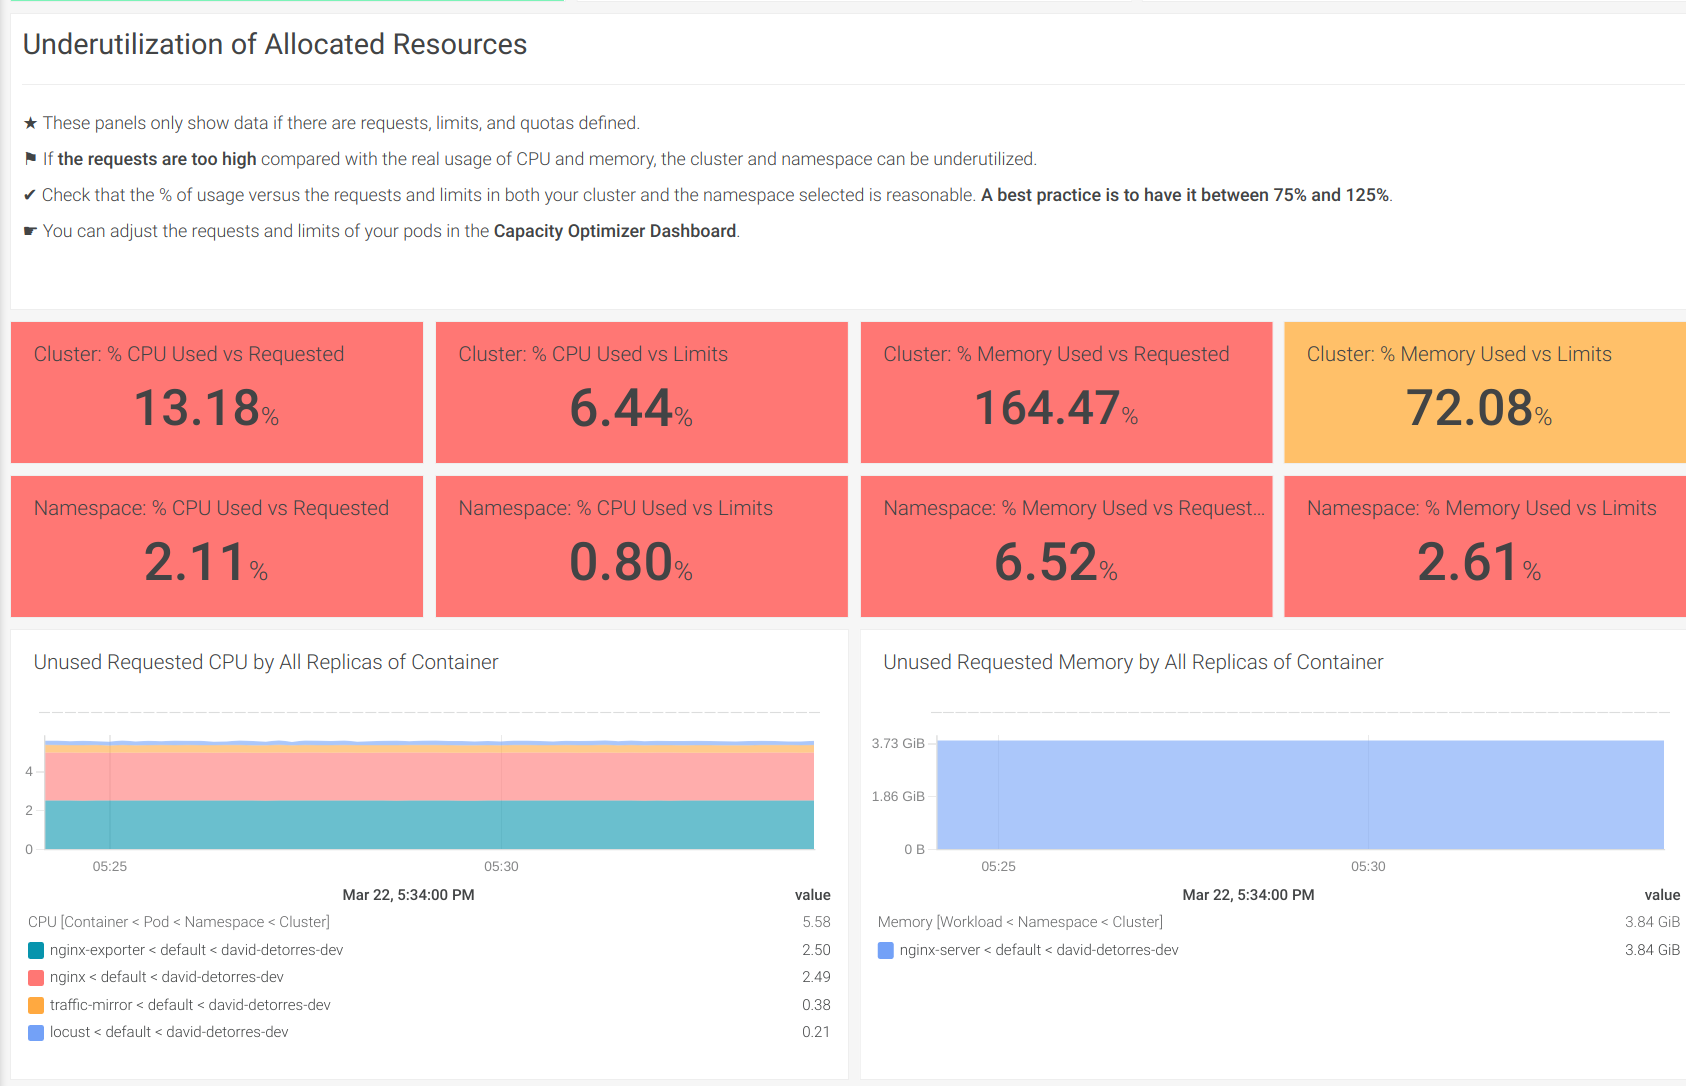 screenshot of the 'underutilization of allocated resources' dashboard that shows the percentage of resources used vs requested